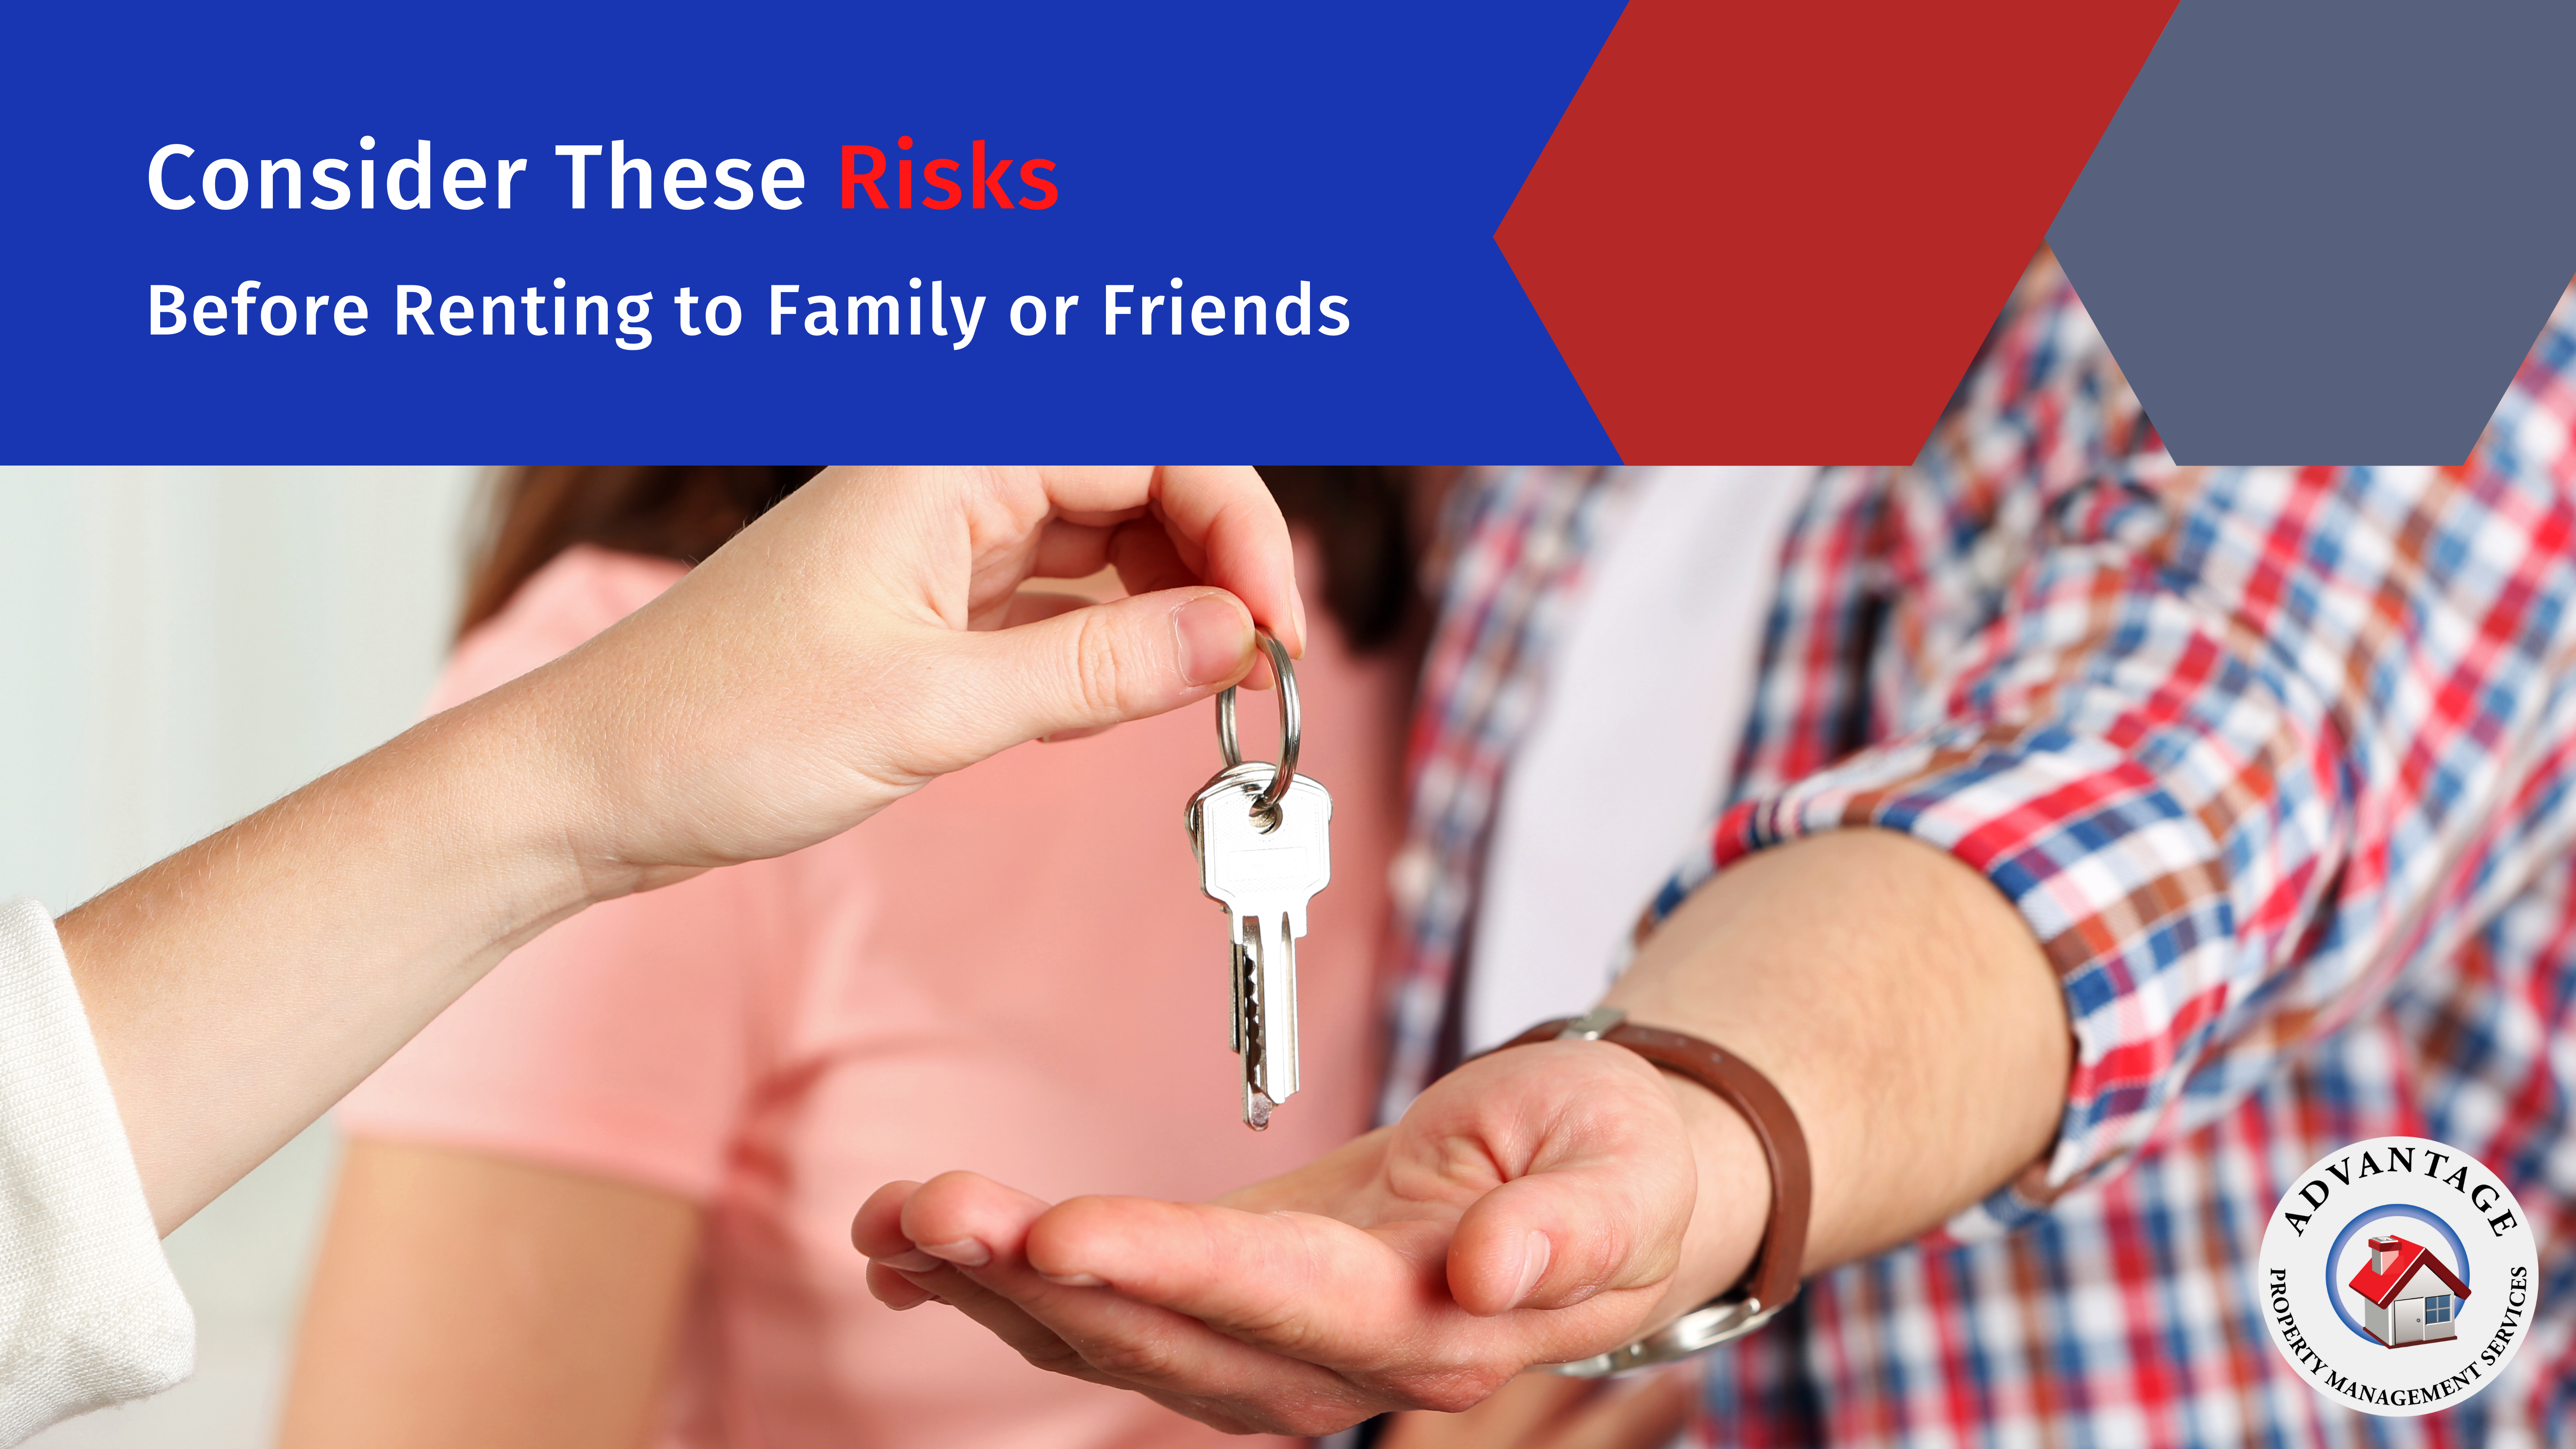 Consider These Risks Before Renting Your Pleasanton Property to Family or Friends